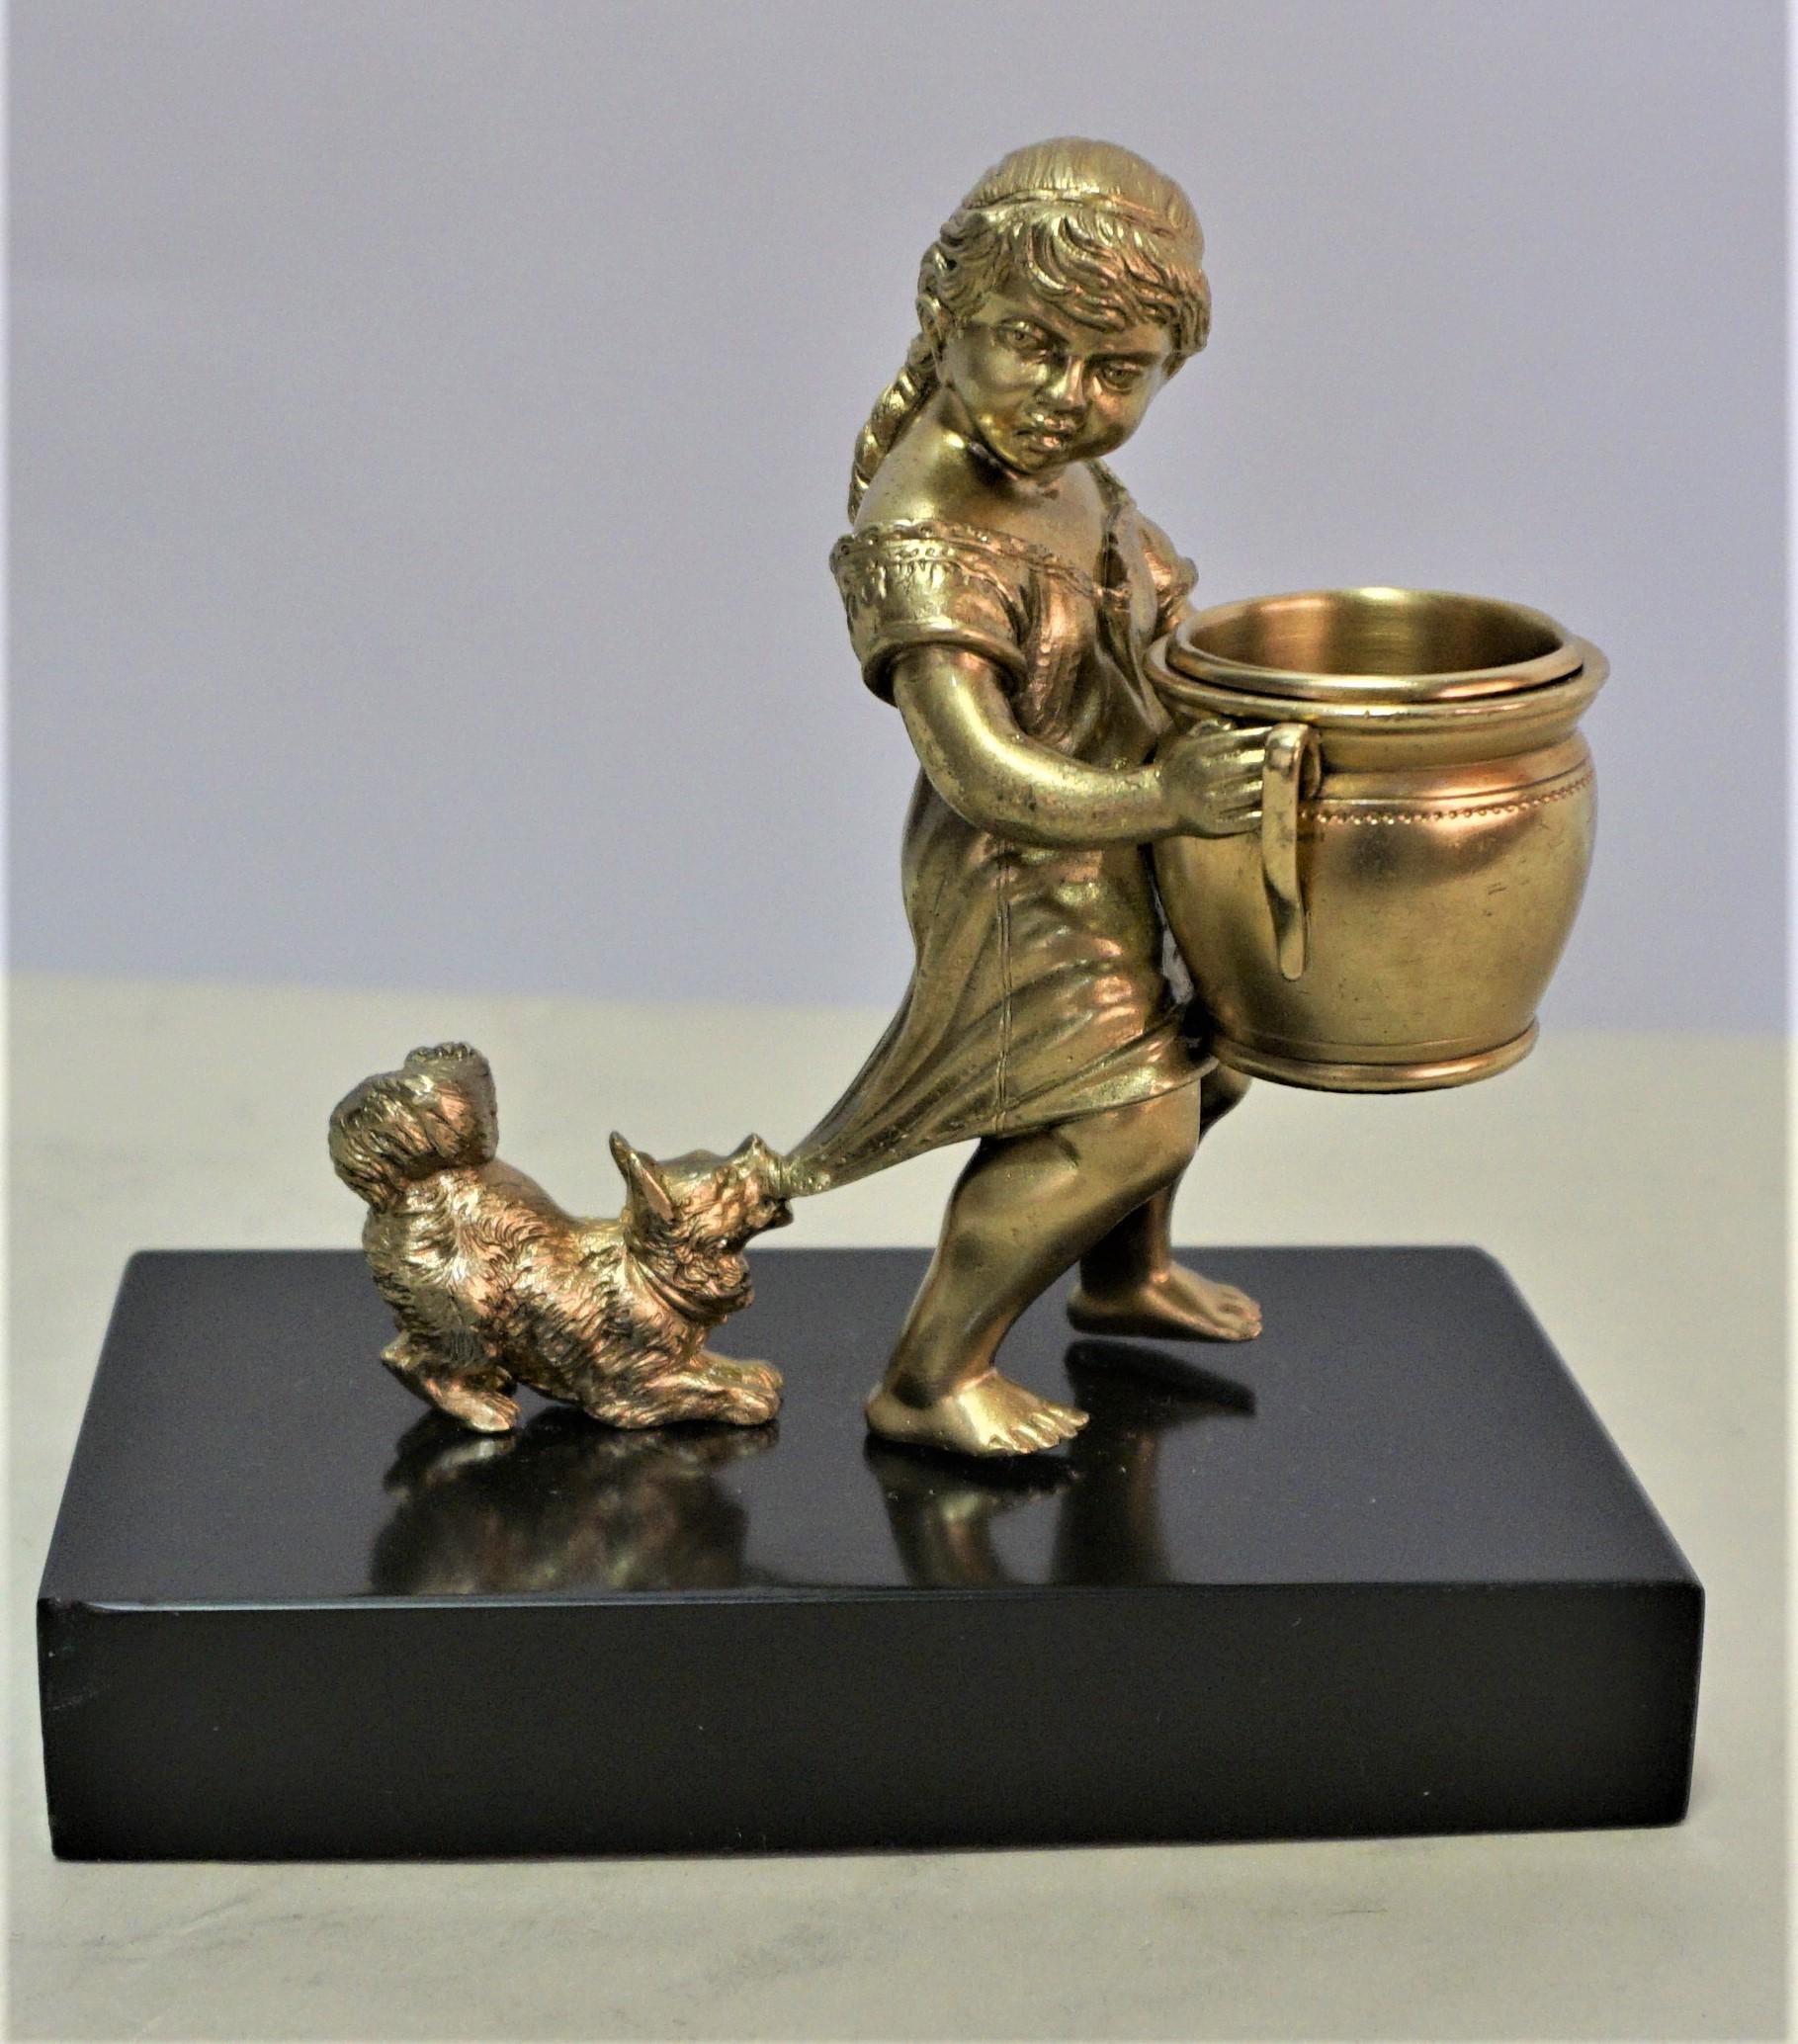 Adorable bronze statue of a young little girl pulled by the dog.